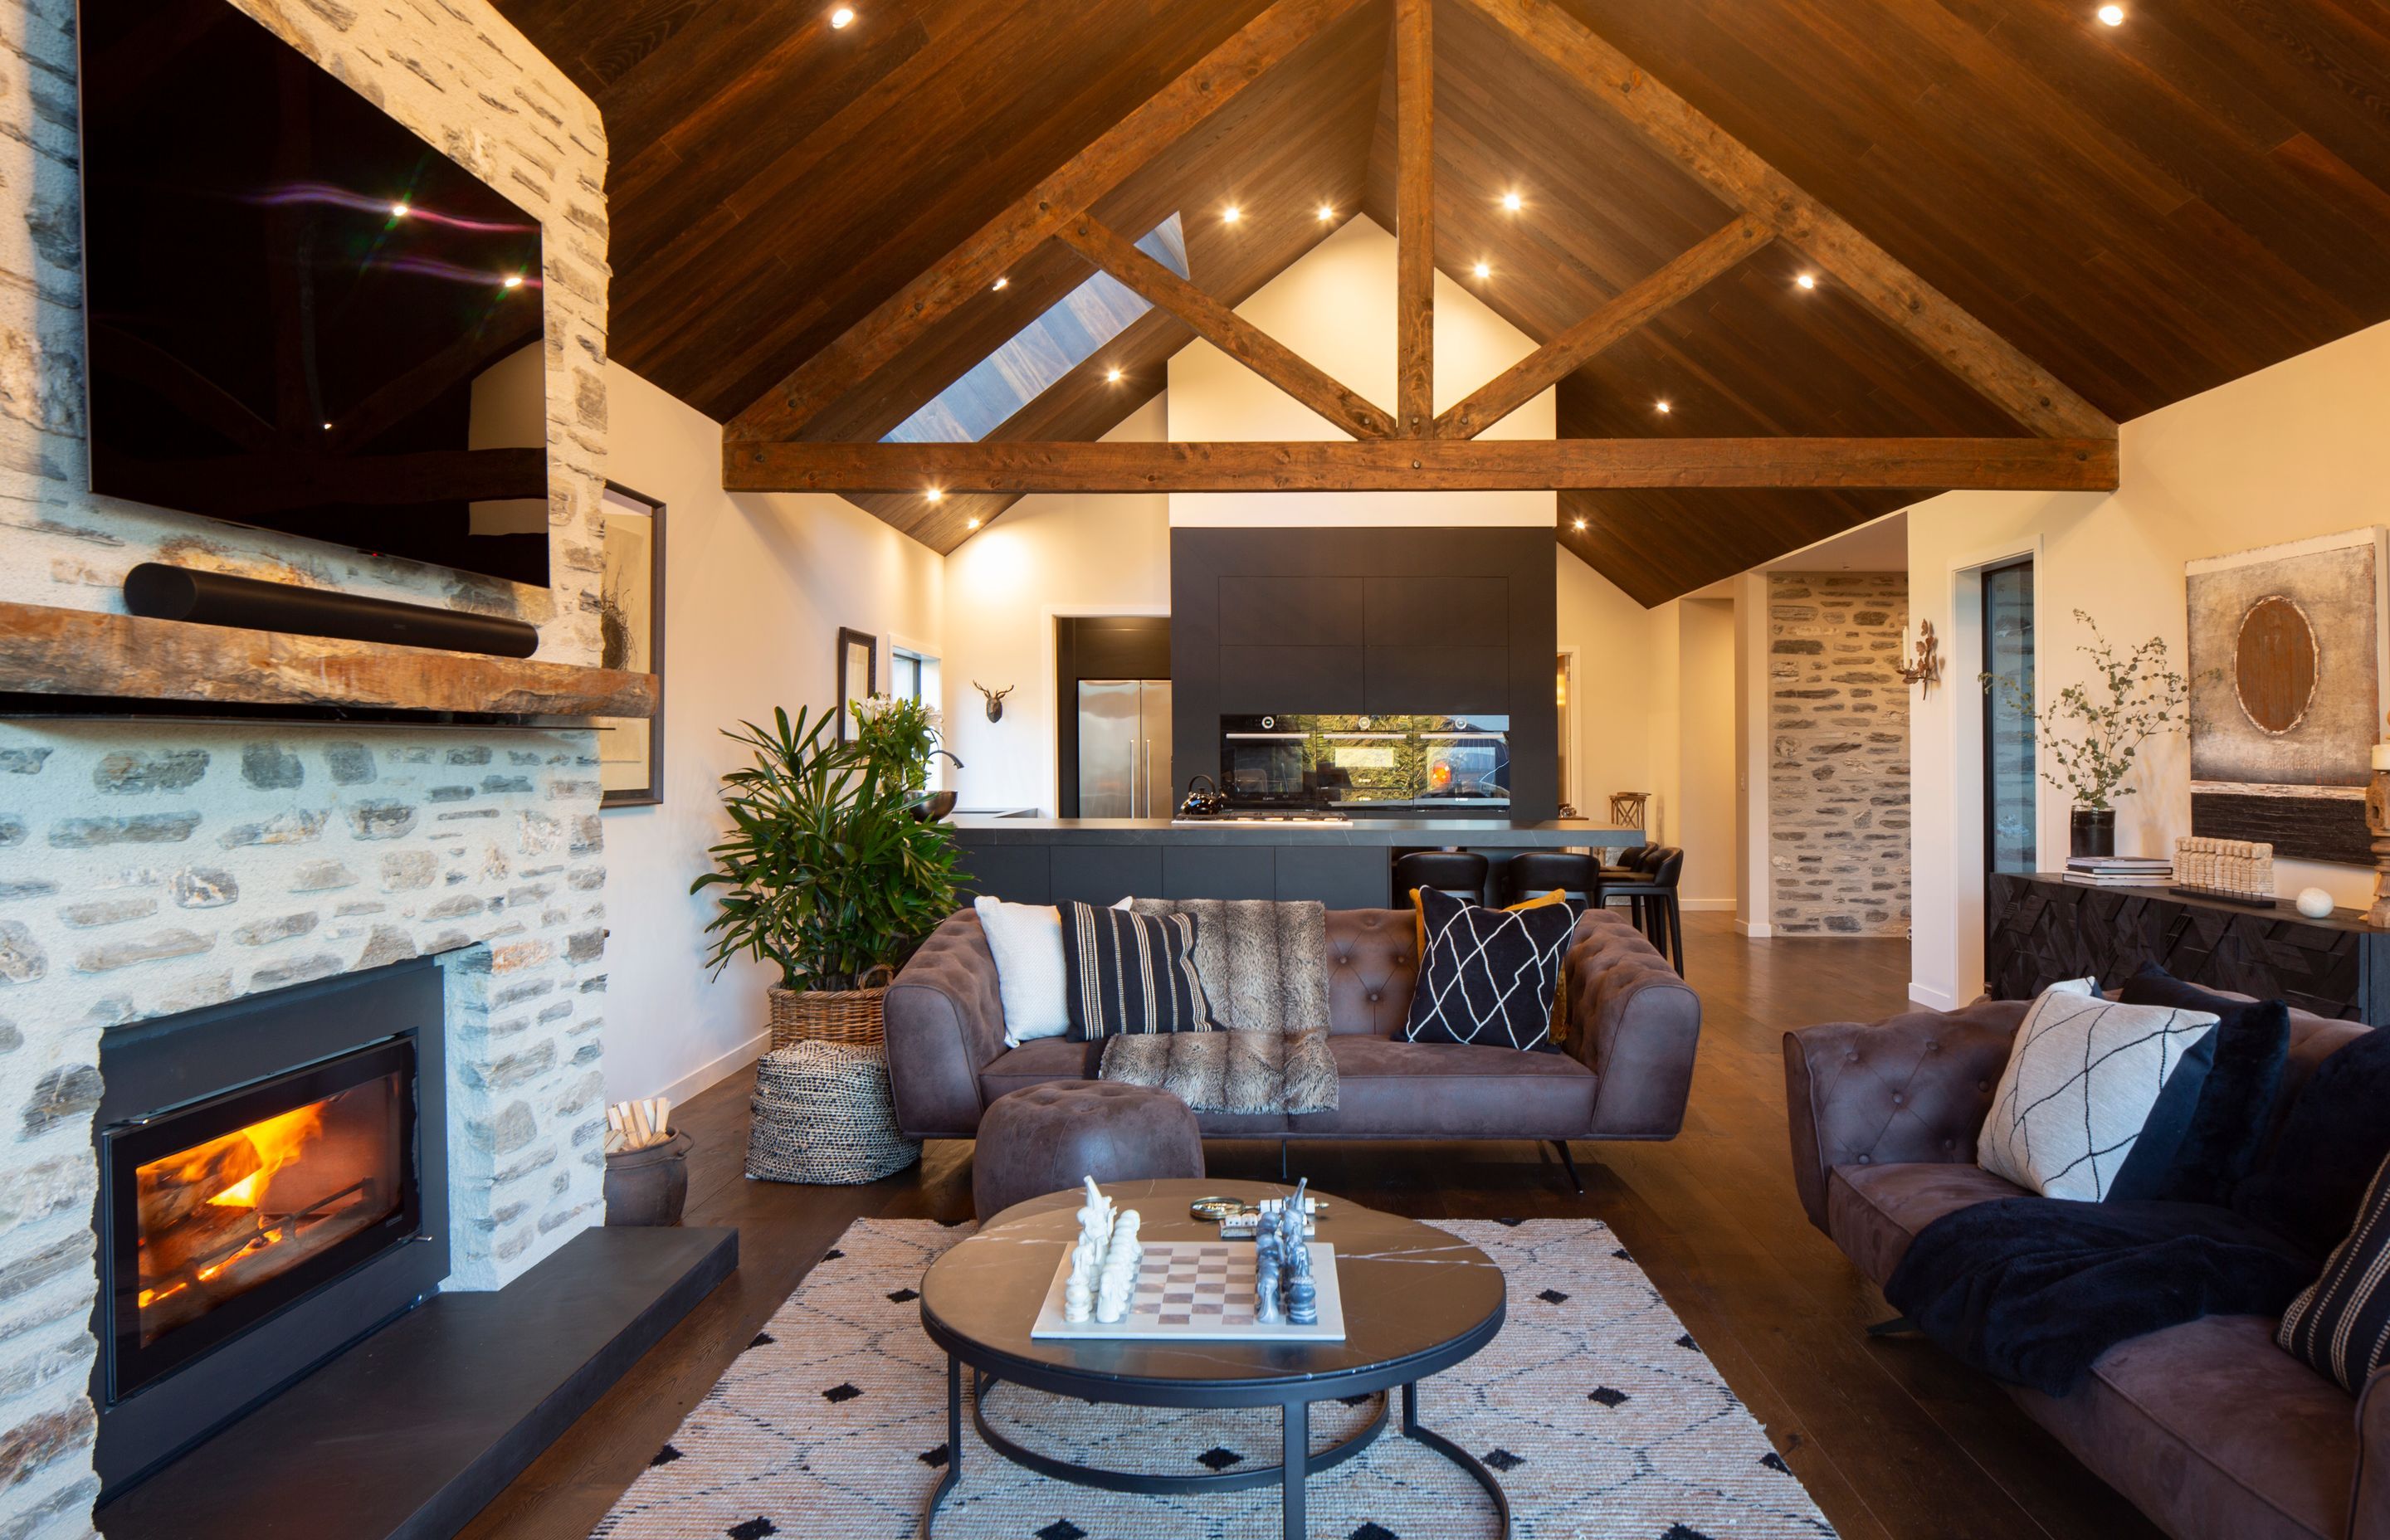 Exposed trusses, French oak flooring and a fireplace wrapped in long, thin schist sourced from Glenorchy give a lodge-like flavour to the interiors.